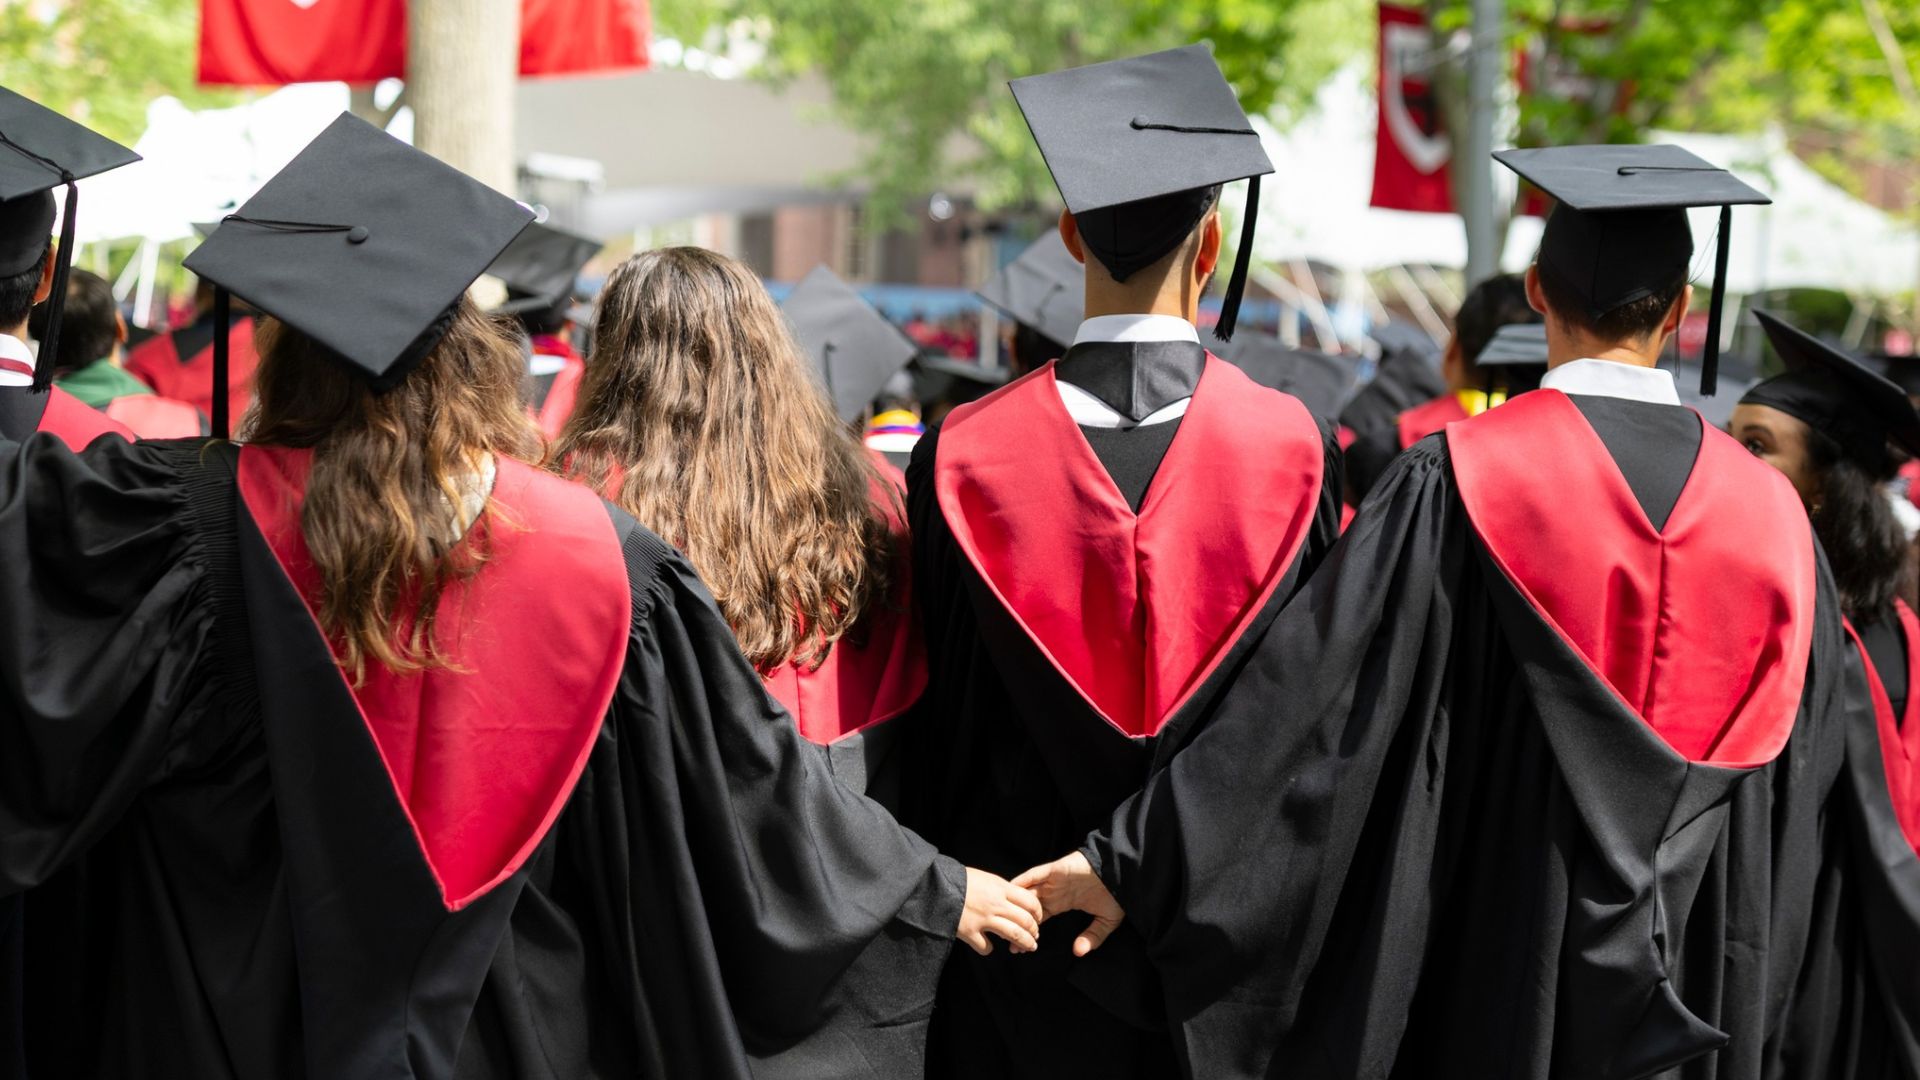 <p>Hundreds of attendees at the Harvard College graduation ceremony staged a walkout in protest against the disqualification of 13 students who had been involved in an earlier encampment.   </p> <p>This group was said to be involved in activities deemed inappropriate by the university, leading to their exclusion from the graduation ceremony.   </p>